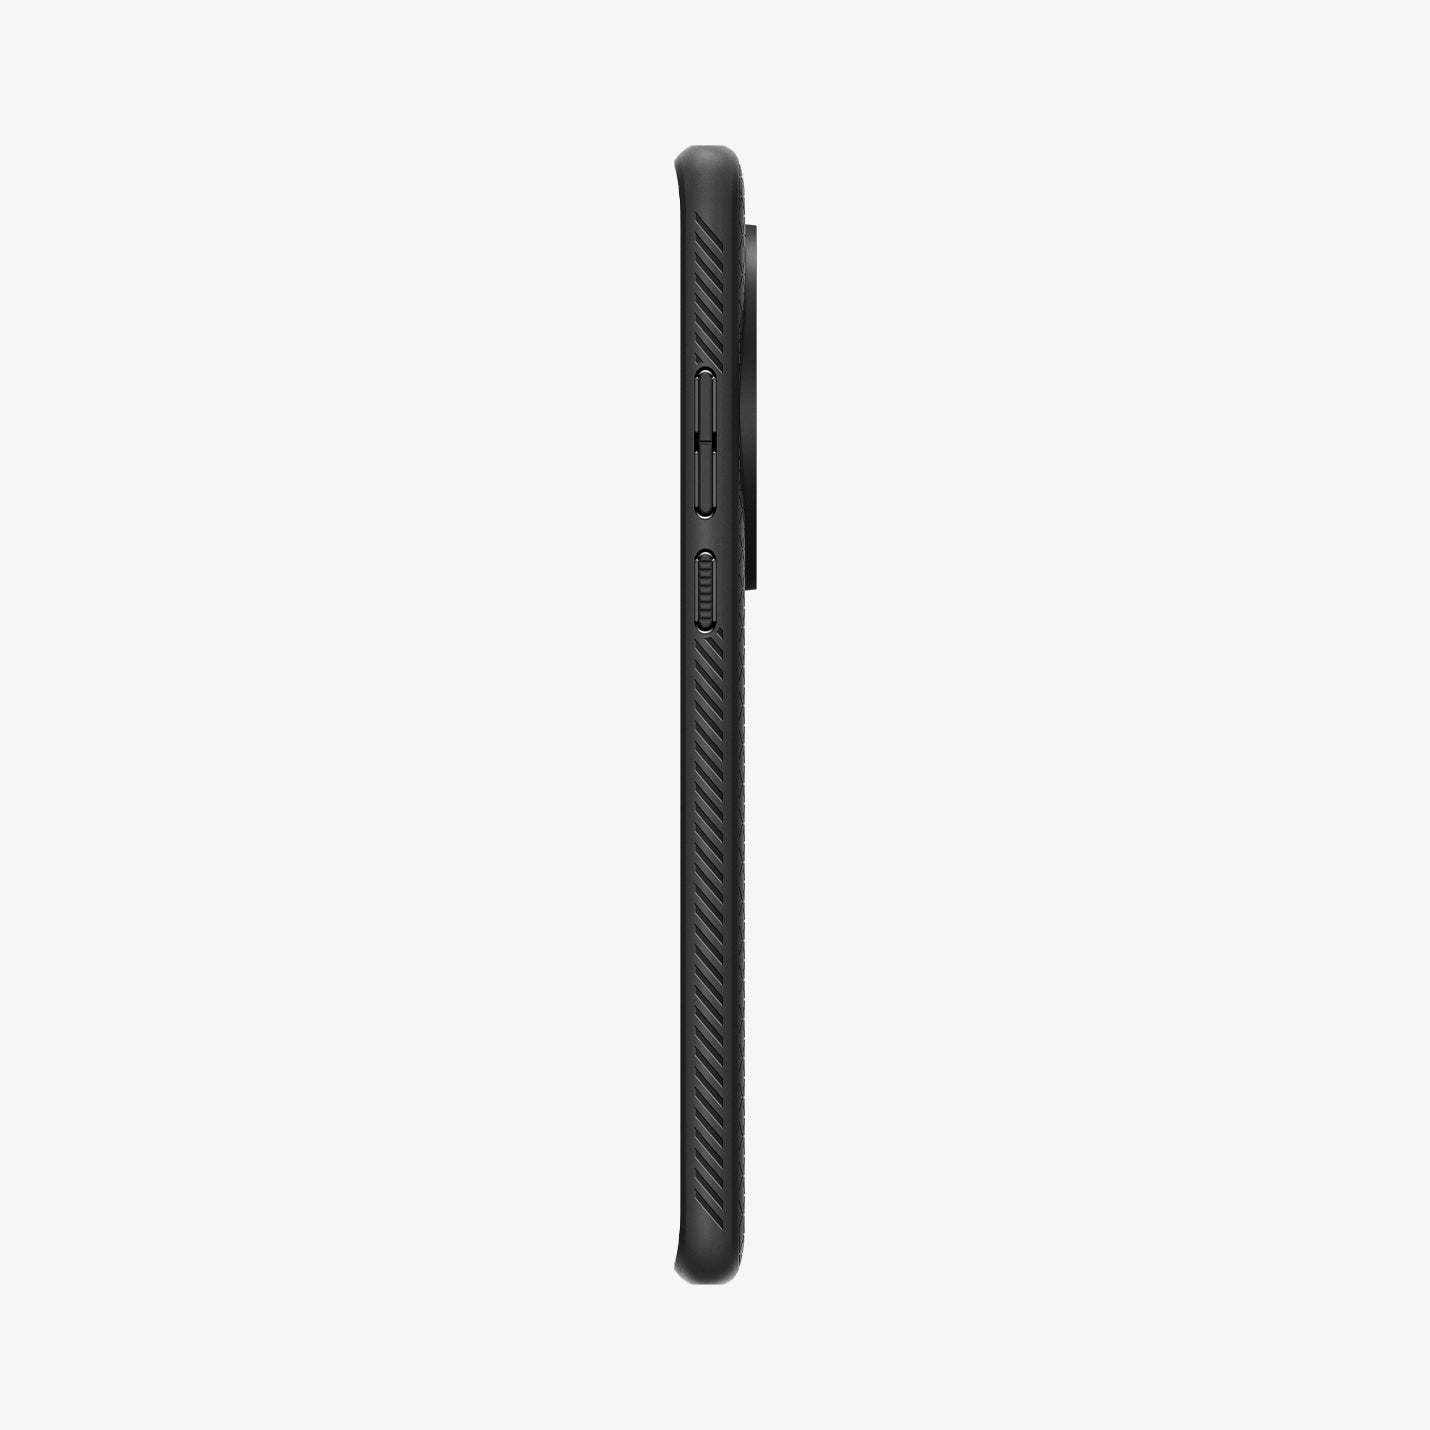 ACS07375 - OnePlus 12 Case Liquid Air in Matte Black showing the side with side buttons